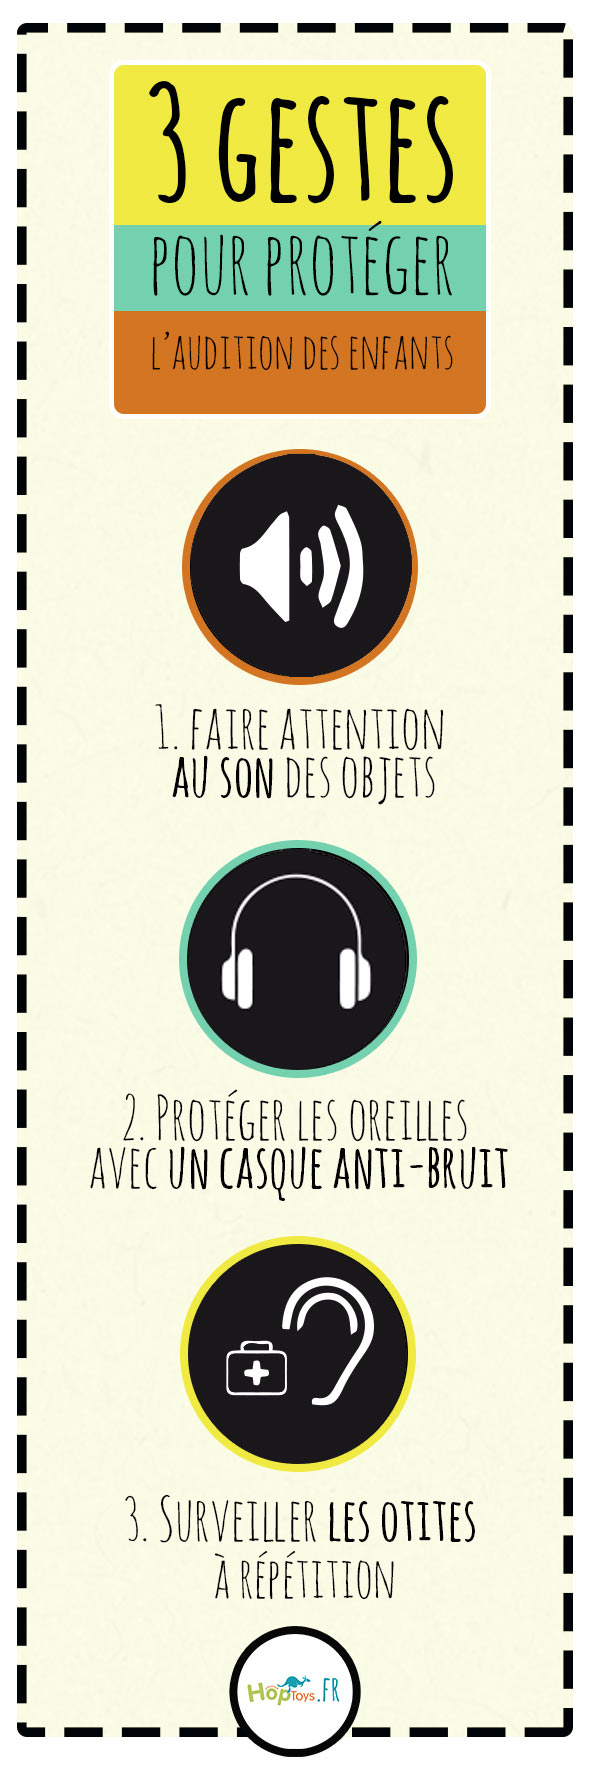 sonores-prevention-nuisance-sonores